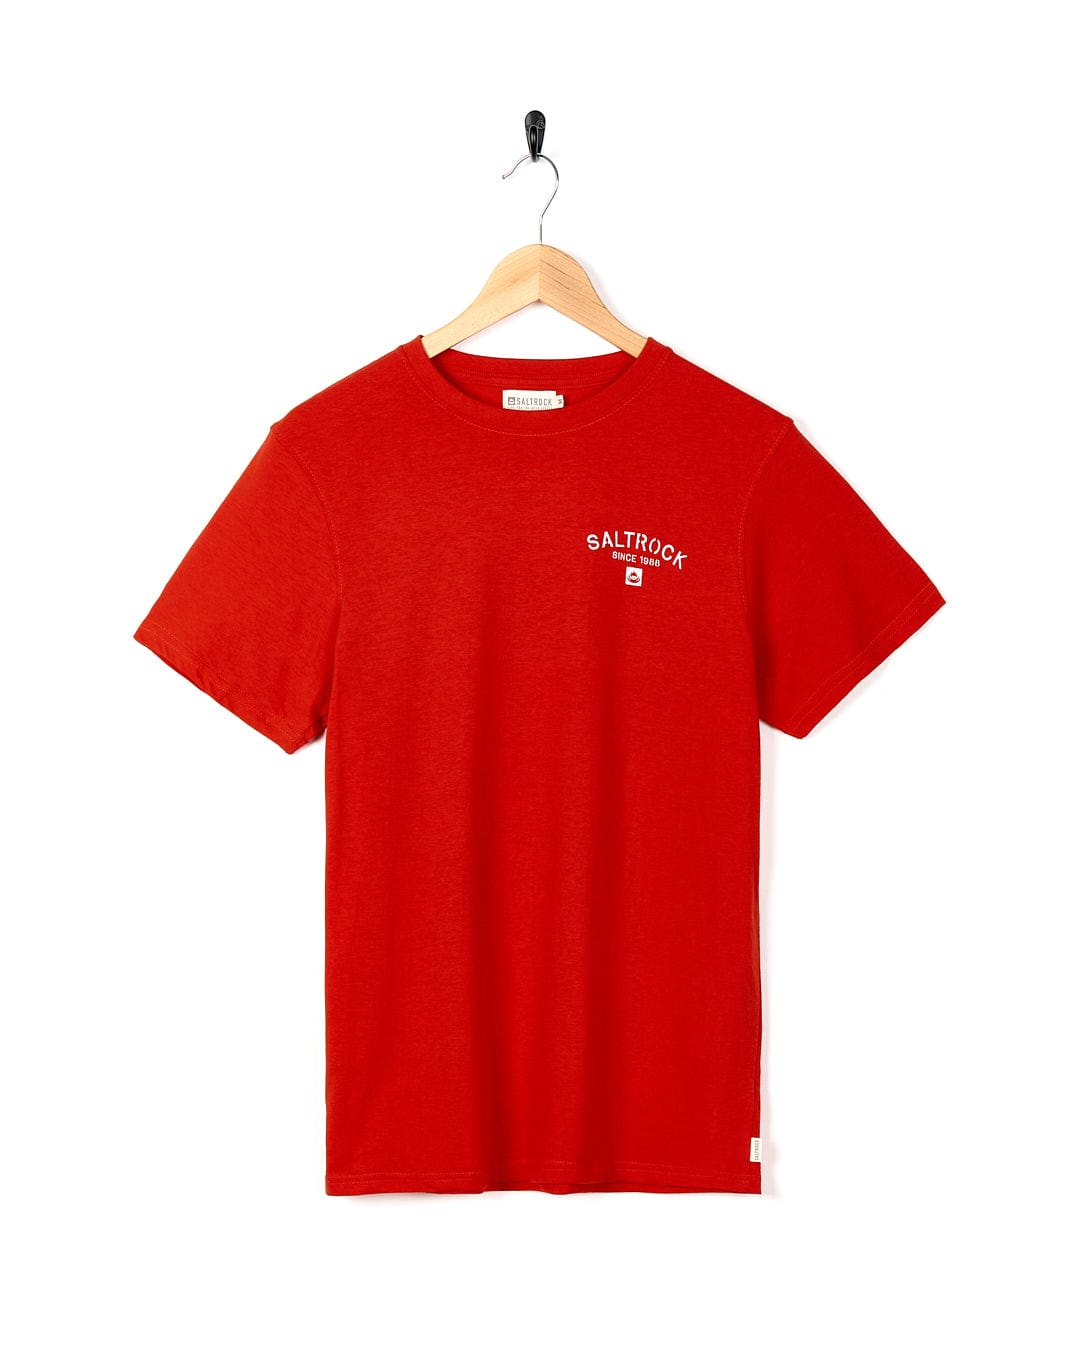 A Stencil - Mens Saundersfoot Location T-Shirt - Red by Saltrock with a white logo on it.